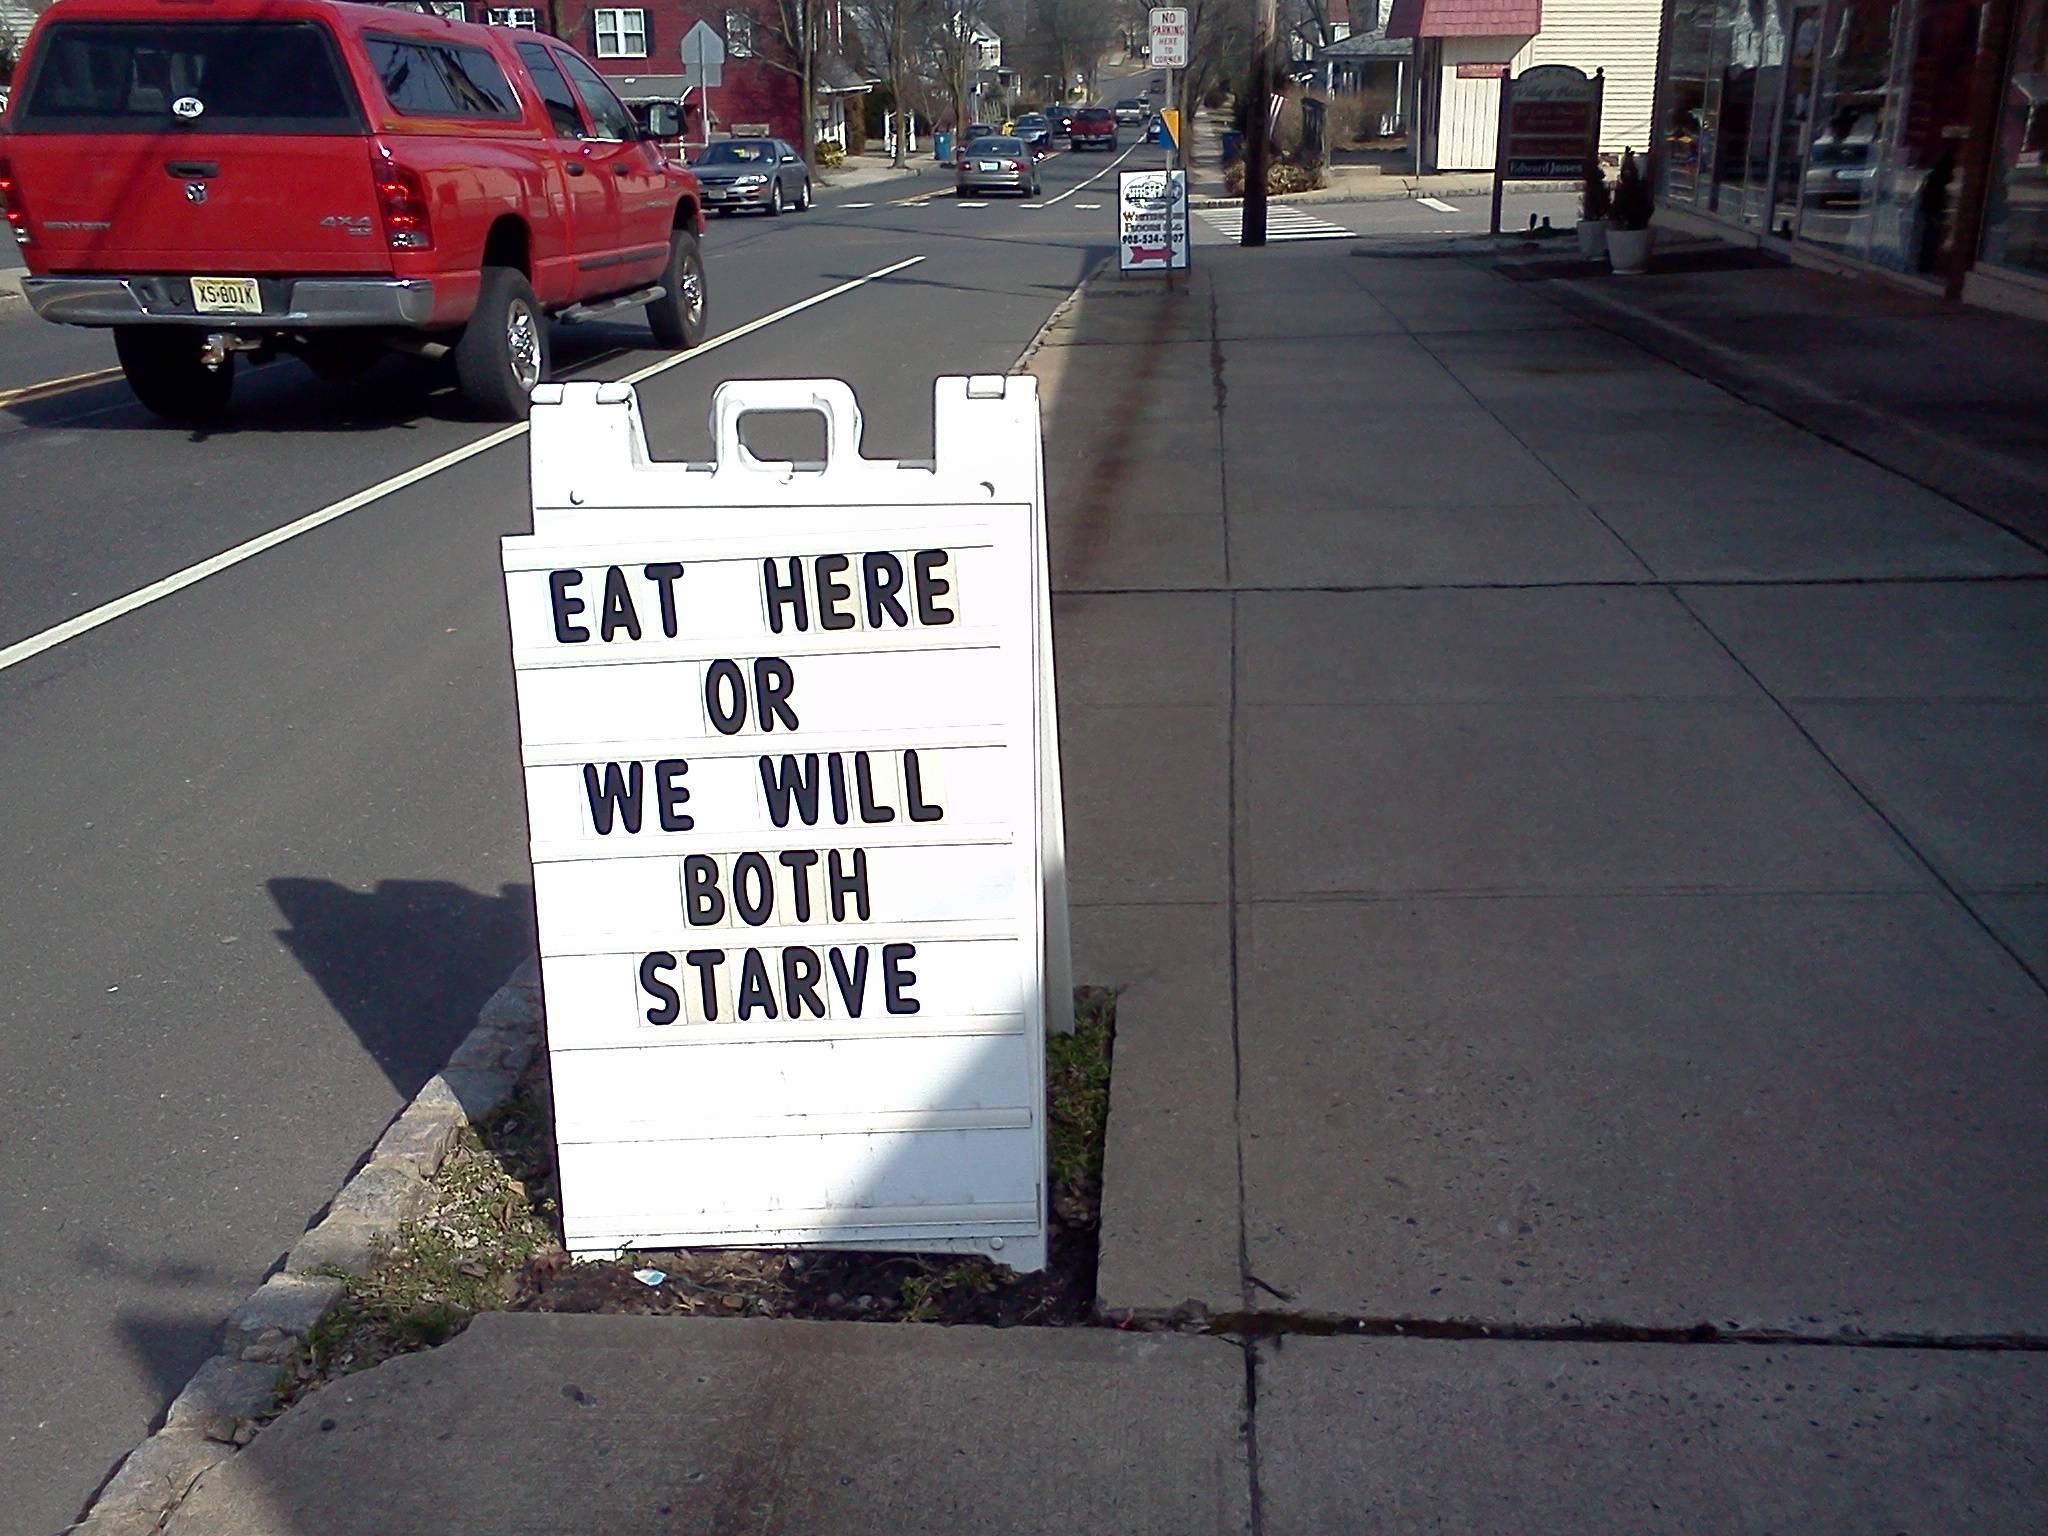 22 Businesses That Win The Award For Honesty